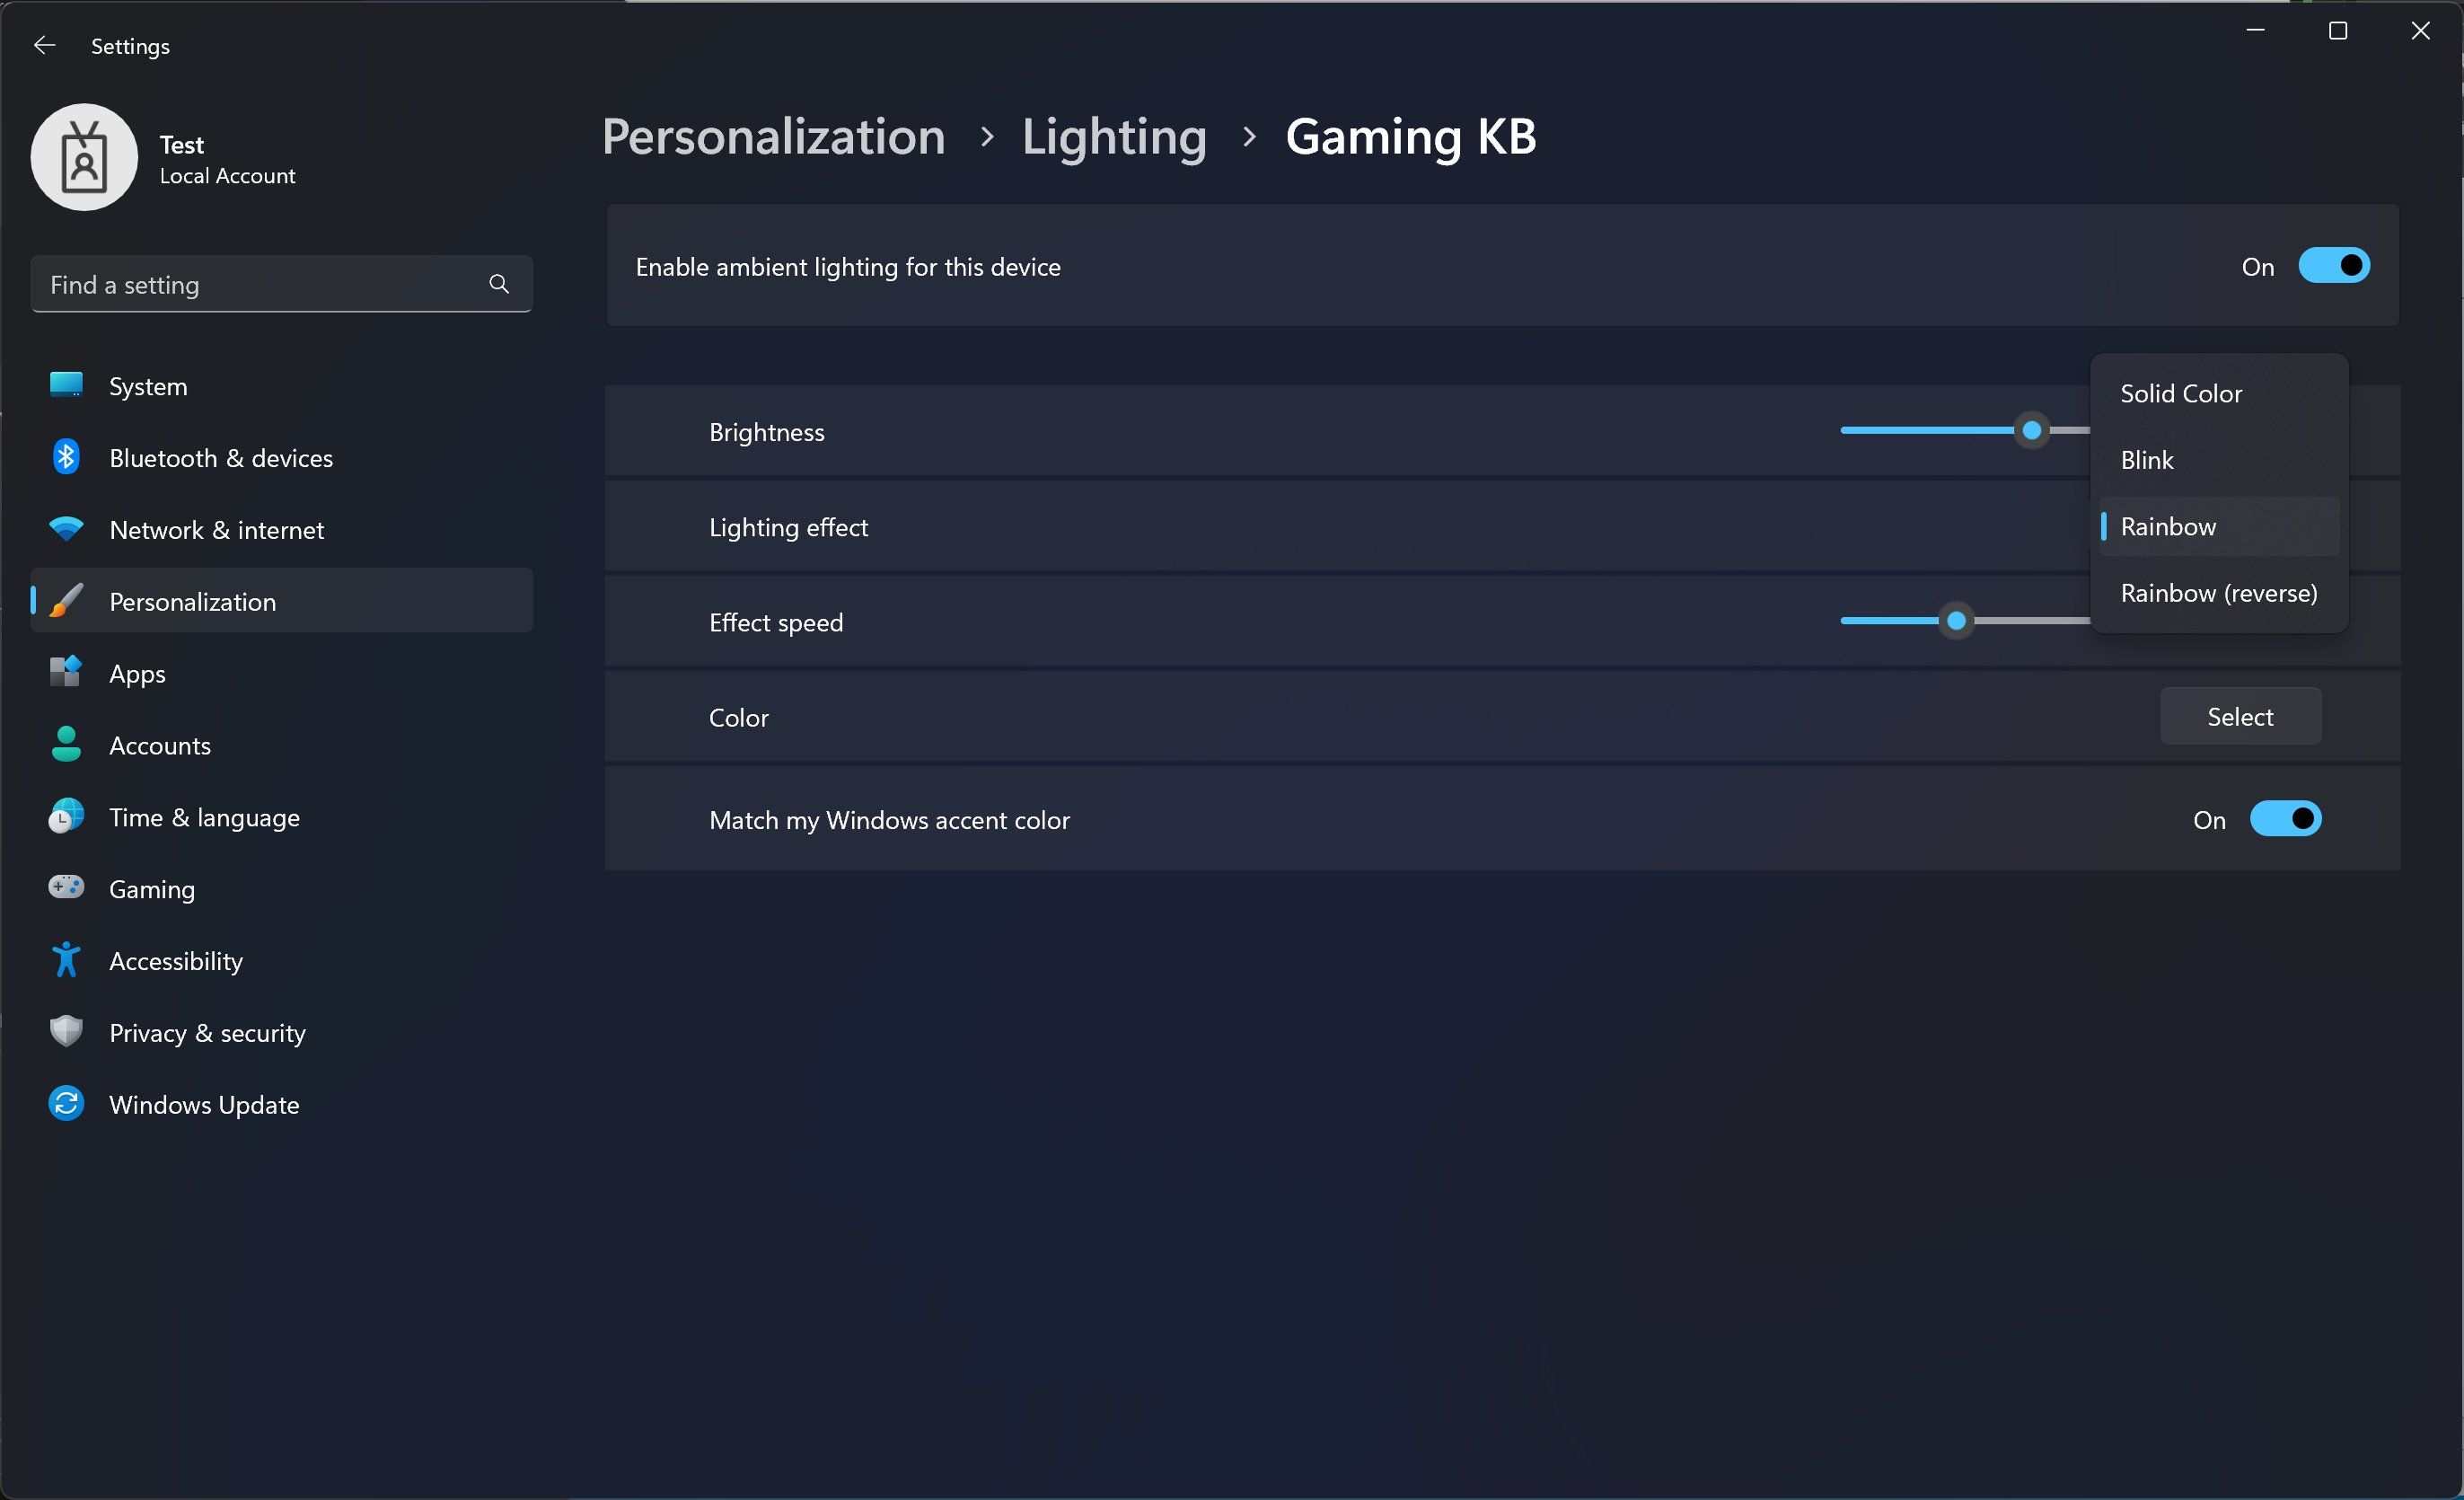 Screenshot of the Windows 11 Settings app showing RGB lighting customization options for a connected keyboard